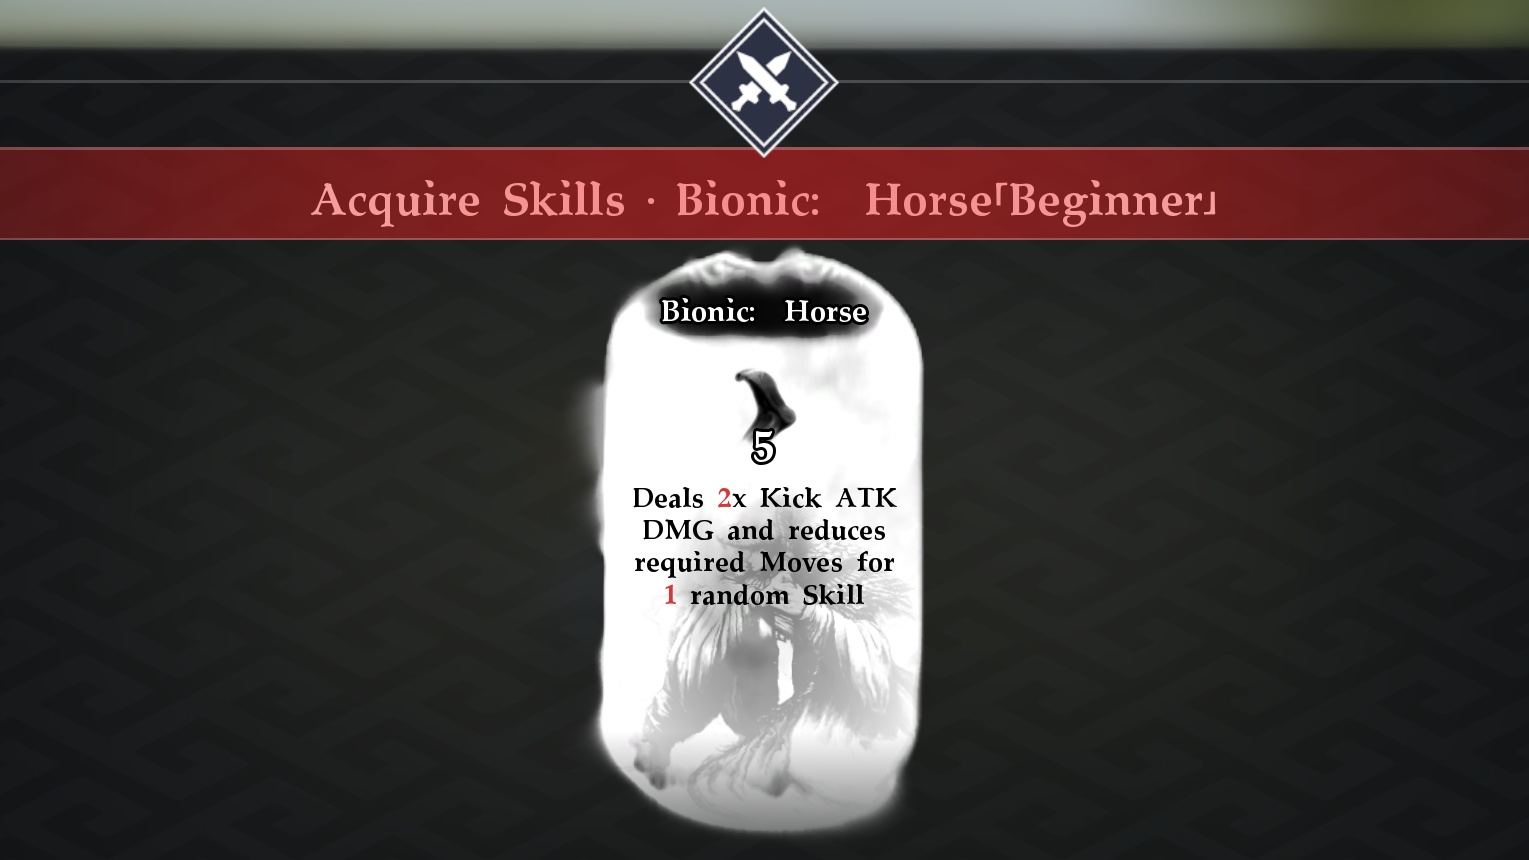 (If you beat up enough horses, you can even unlock a hidden skill.)